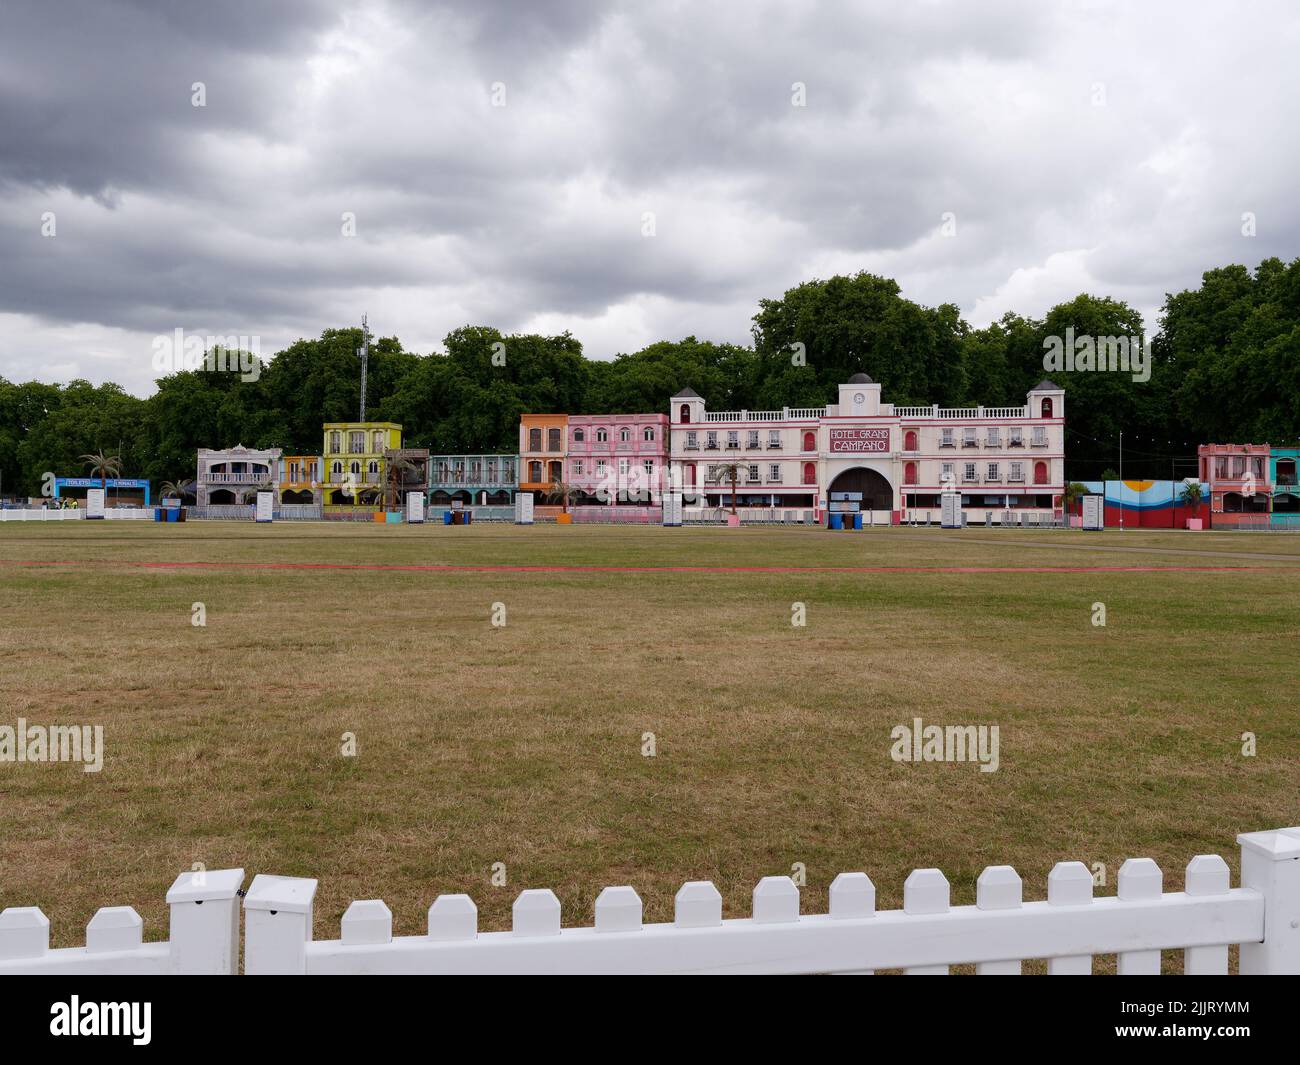 London, Greater London, England, June 30 2022: Temporary buildings housing cinema and food stalls as part of the BST Hyde Park complex concert venue. Stock Photo